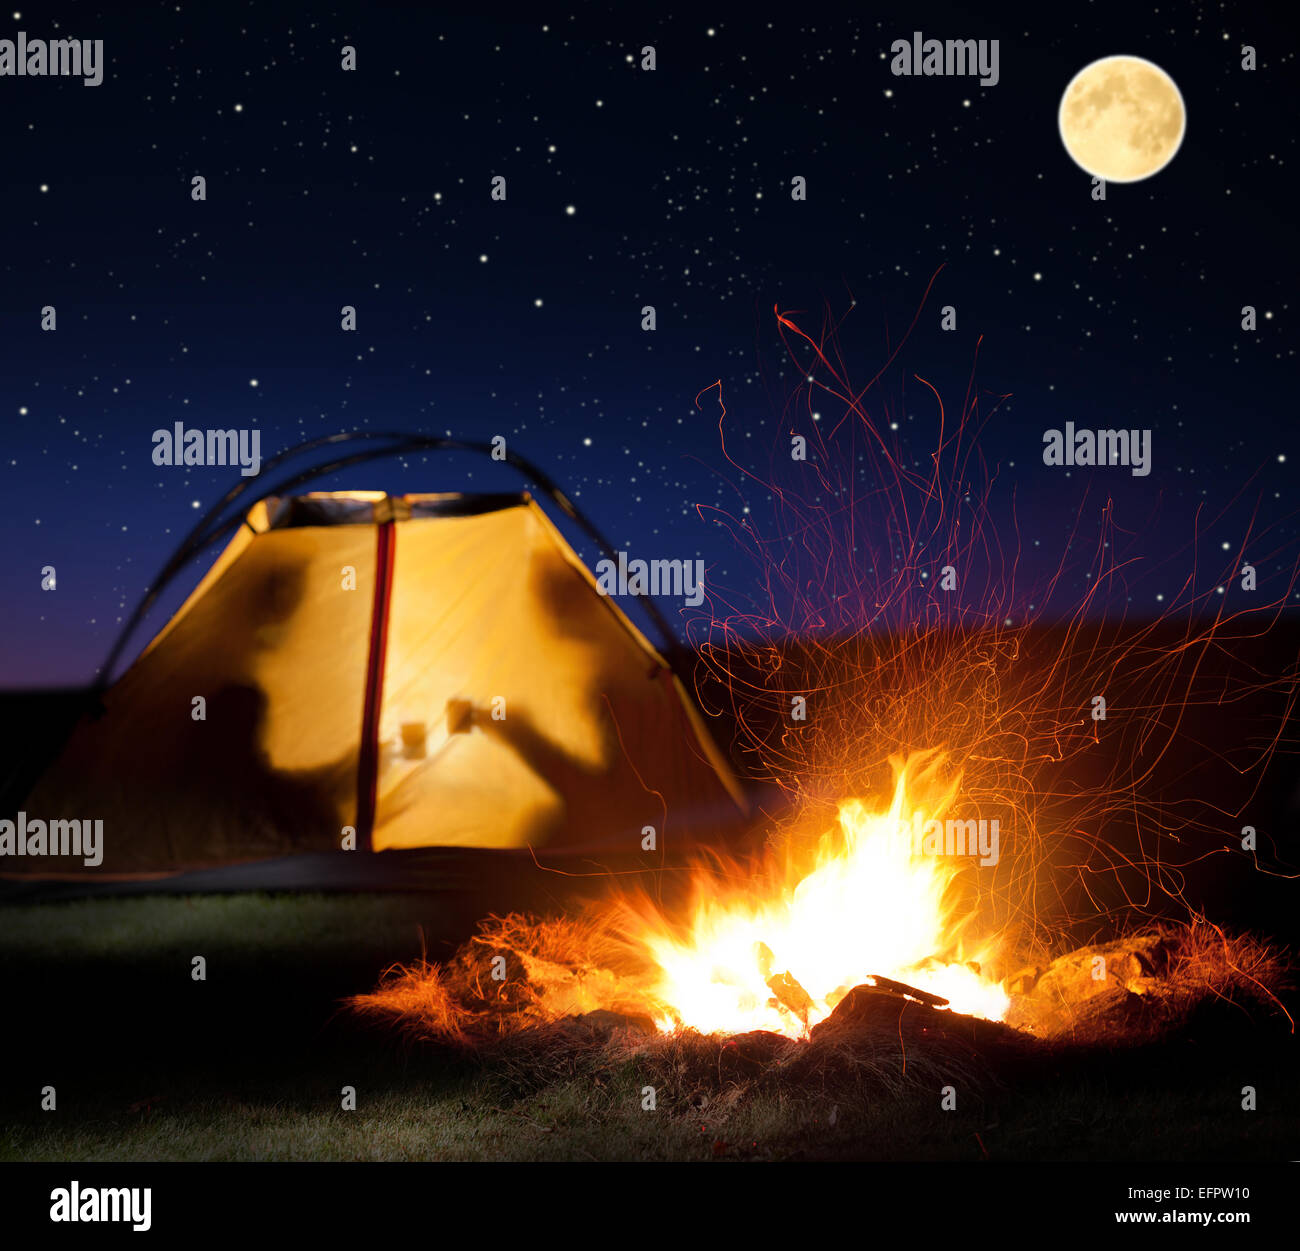 Camp shines at night. The campfire in the front as the symbol of adventure and romantic. Stock Photo